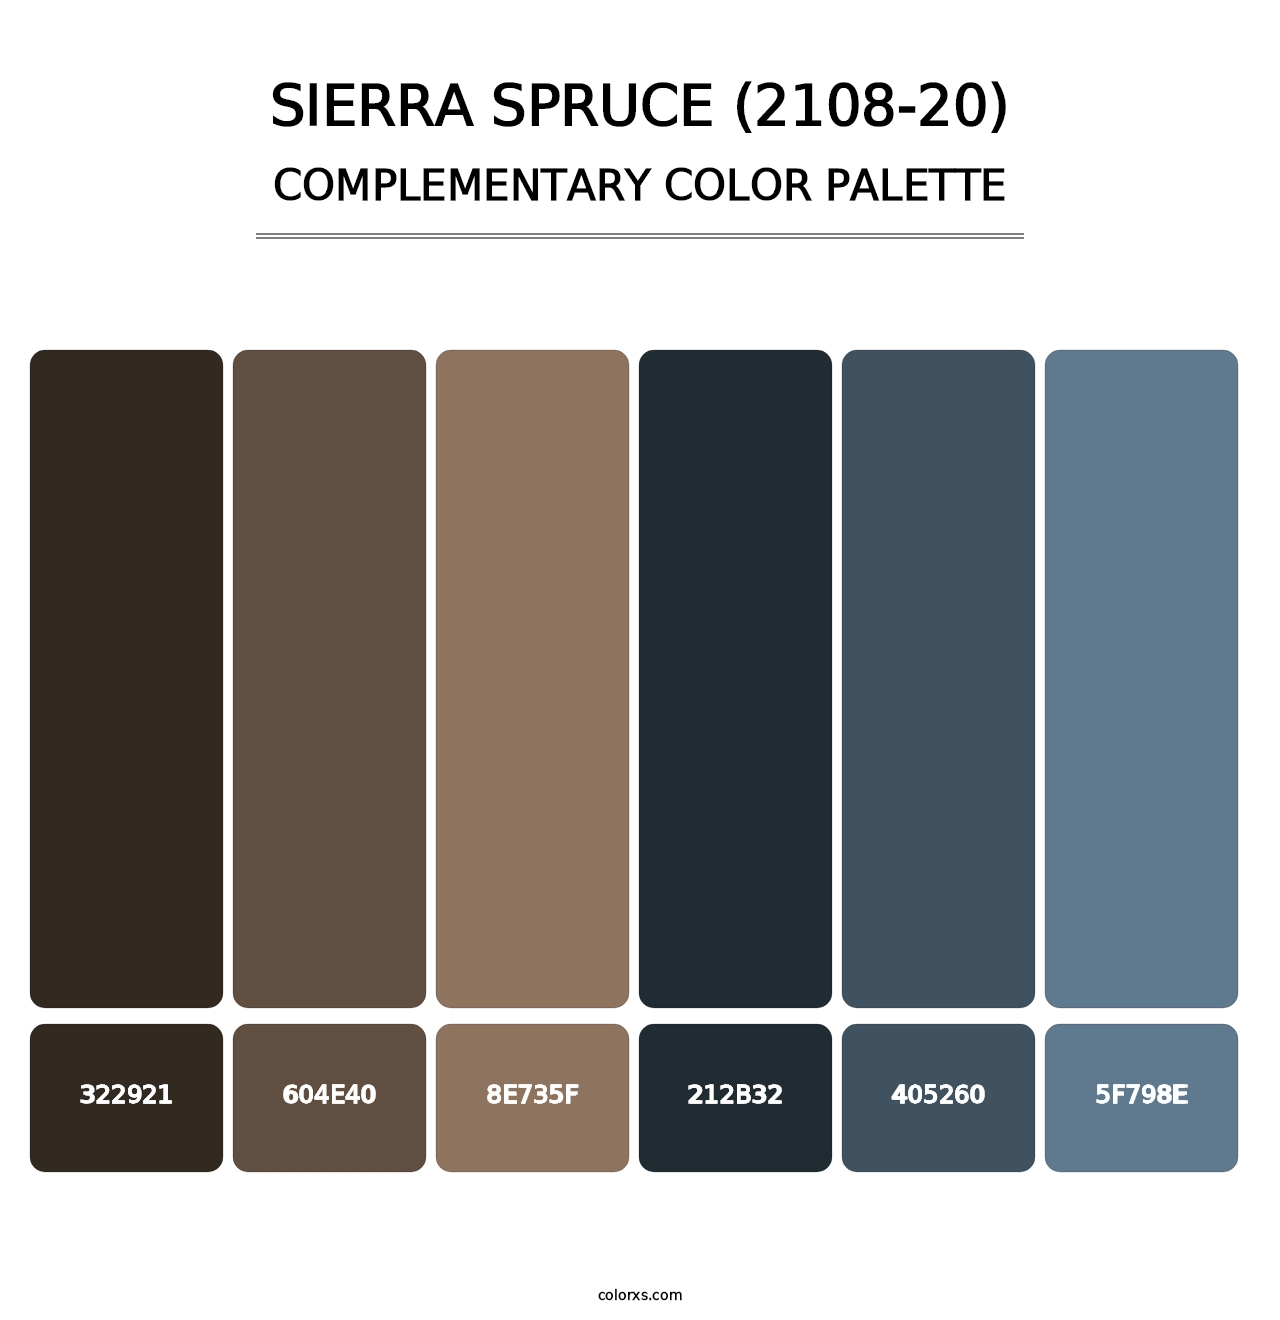 Sierra Spruce (2108-20) - Complementary Color Palette